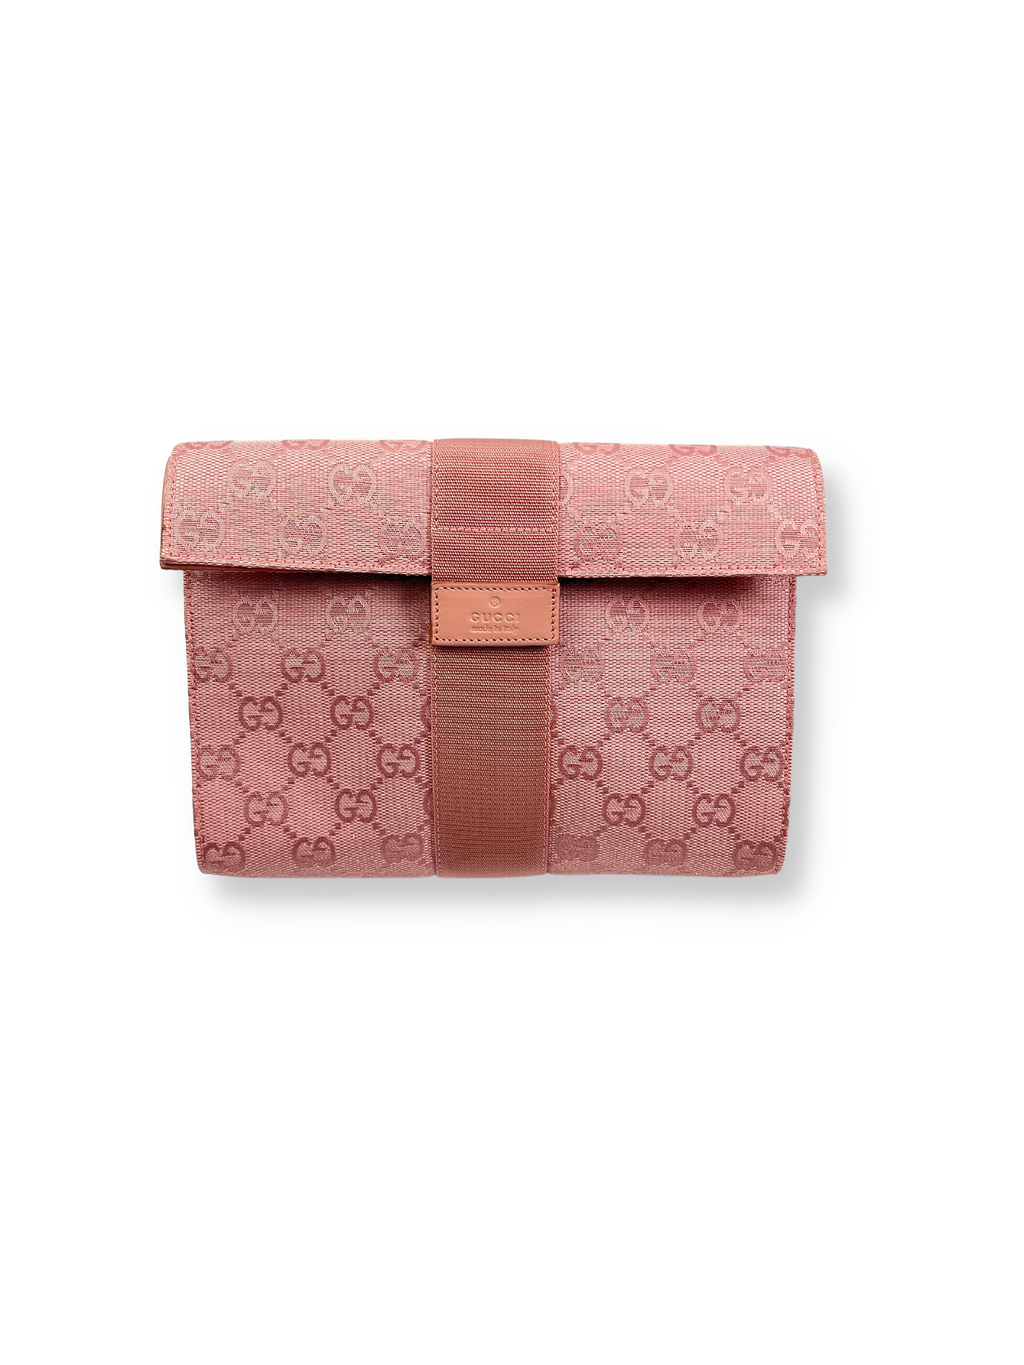 GUCCI - PINK GG CANVAS COSMETIC POUCH